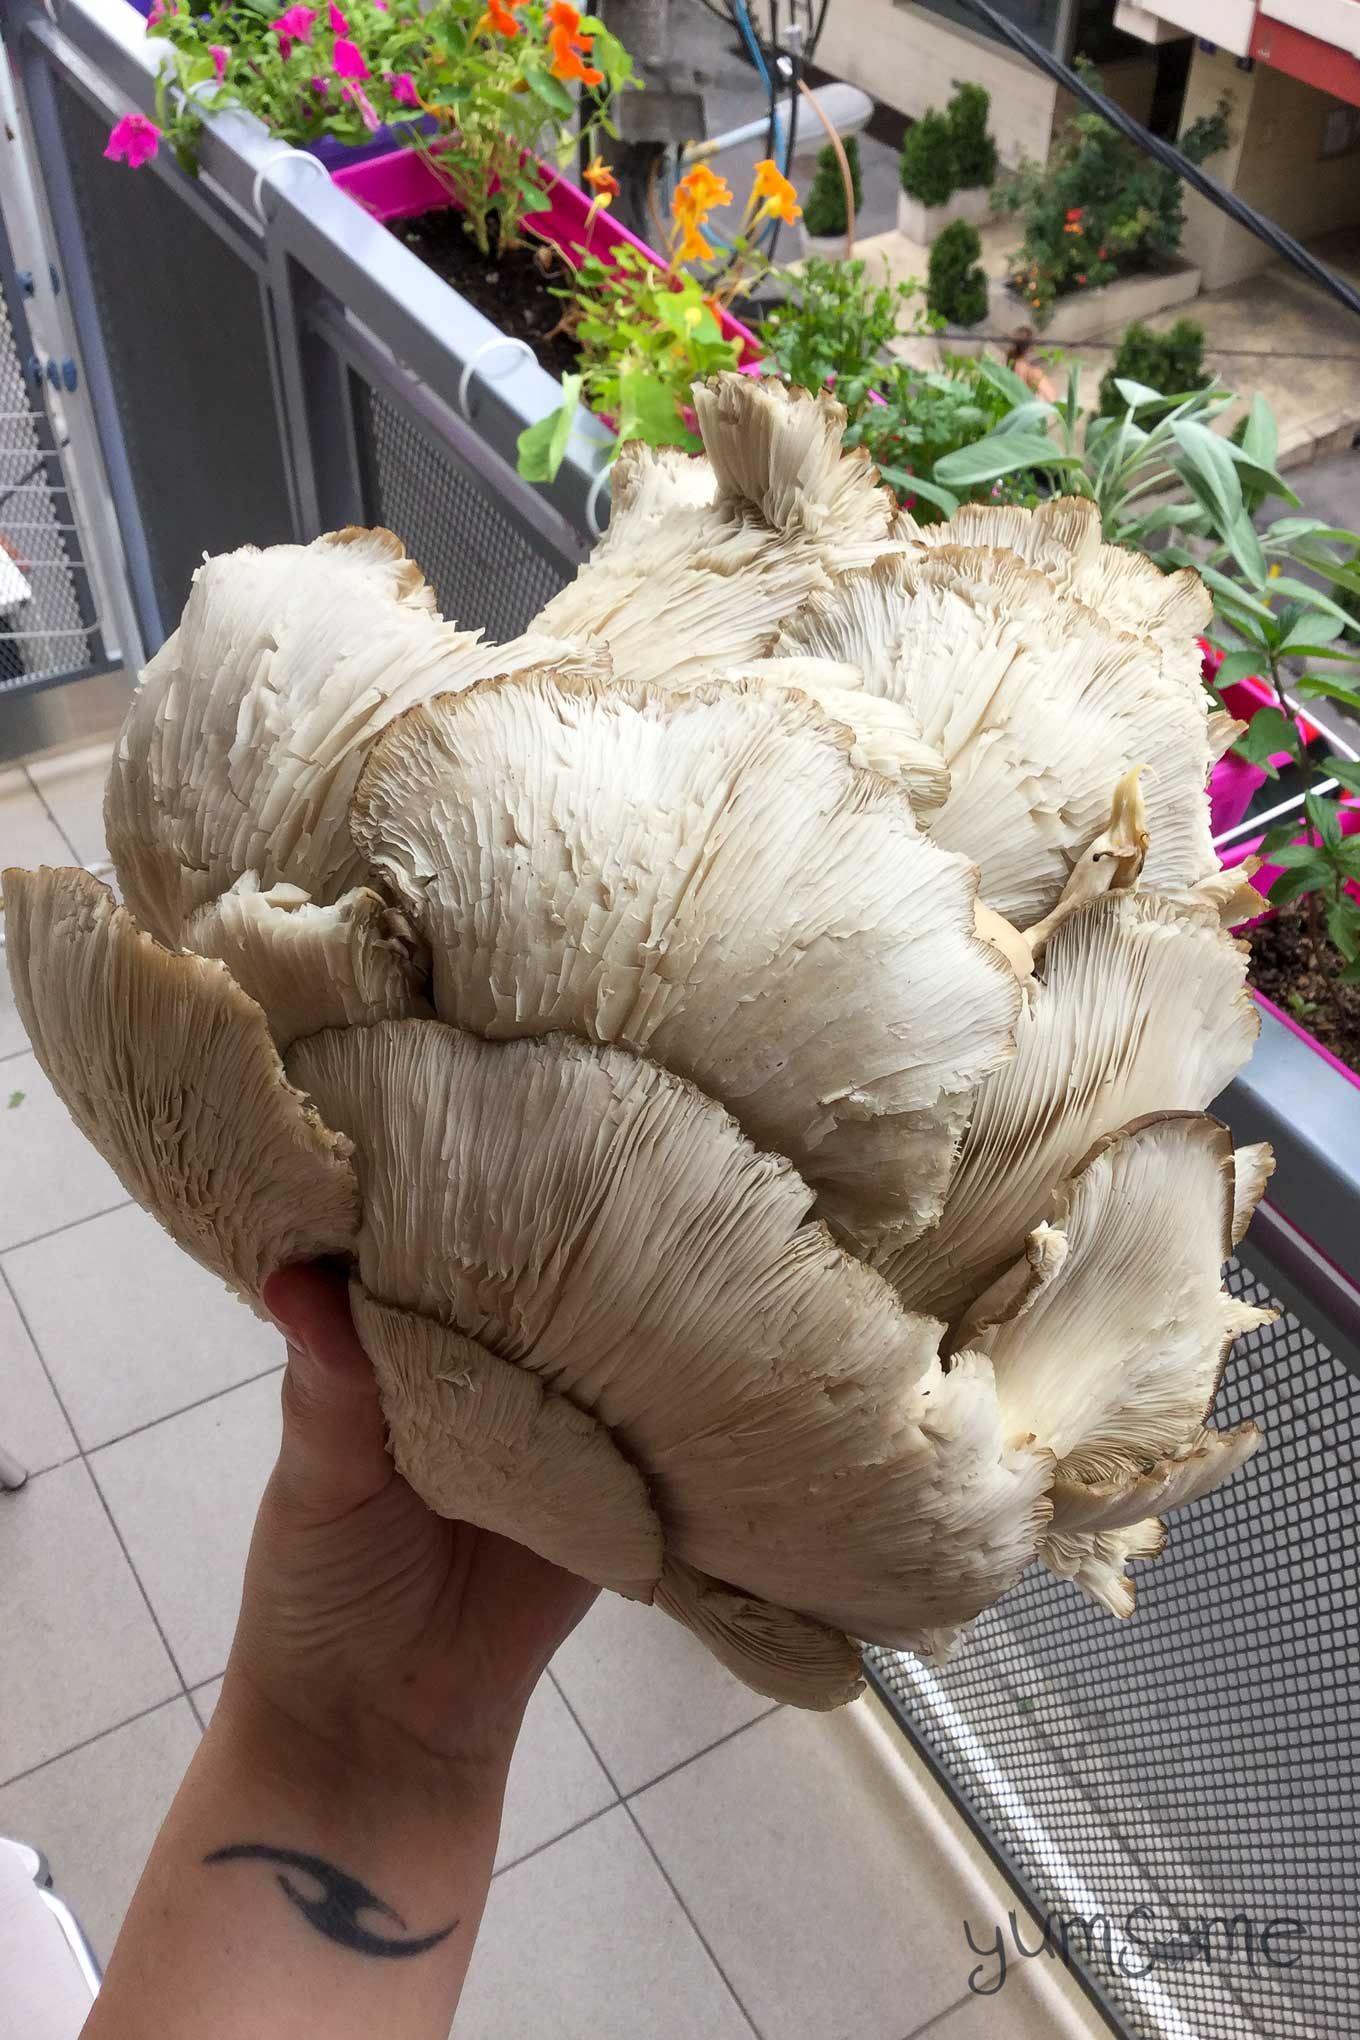 A hand holding an enormous oyster mushroom.